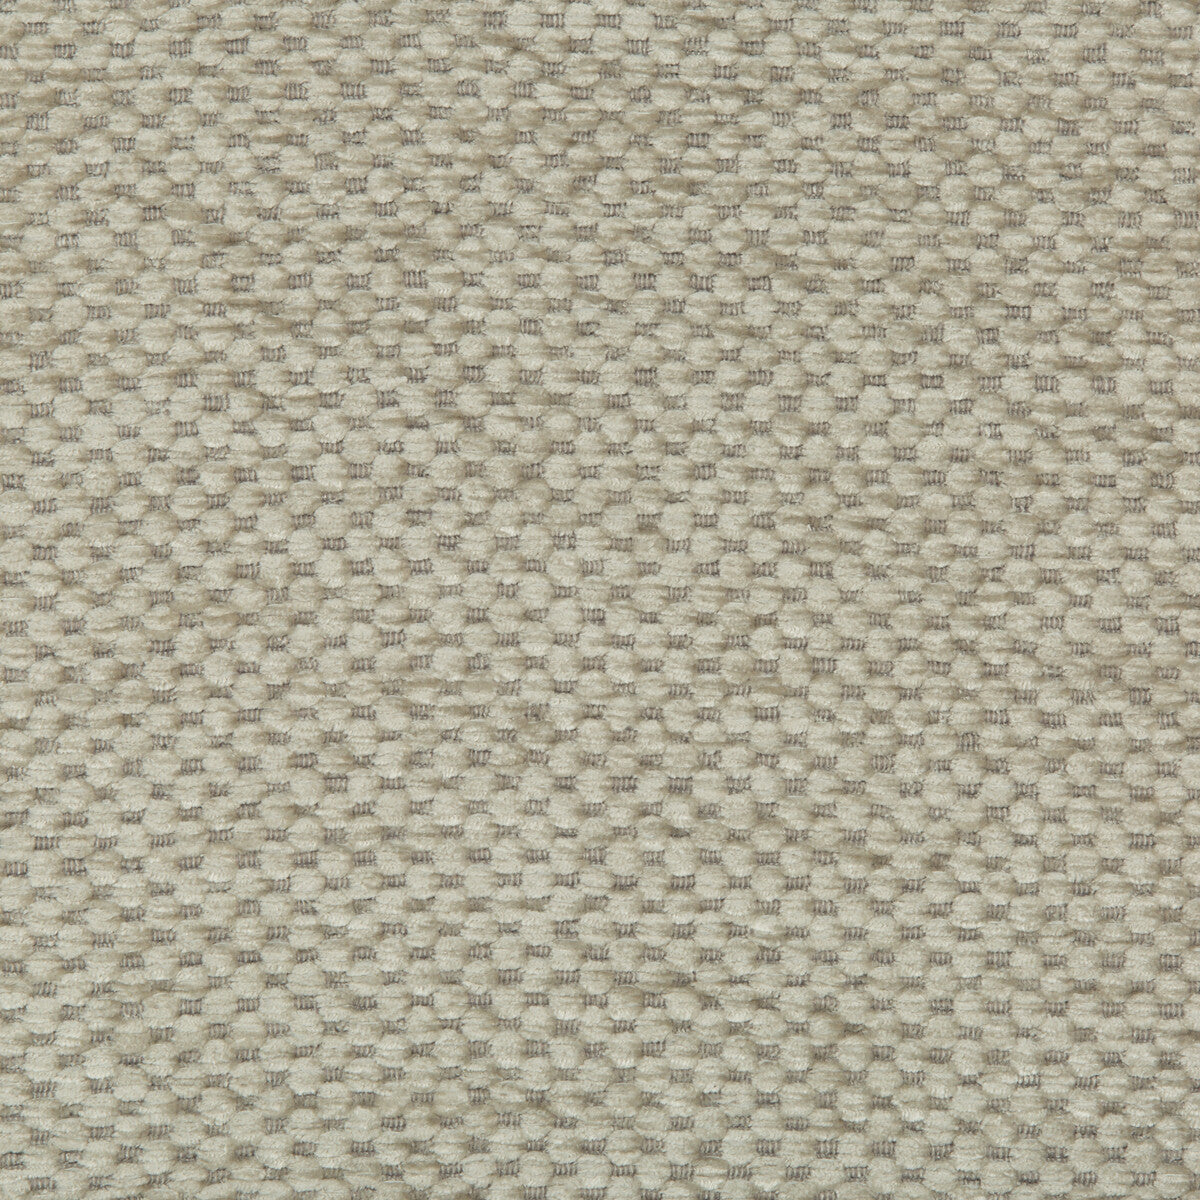 Kravet Design fabric in 35133-11 color - pattern 35133.11.0 - by Kravet Design in the Performance Crypton Home collection